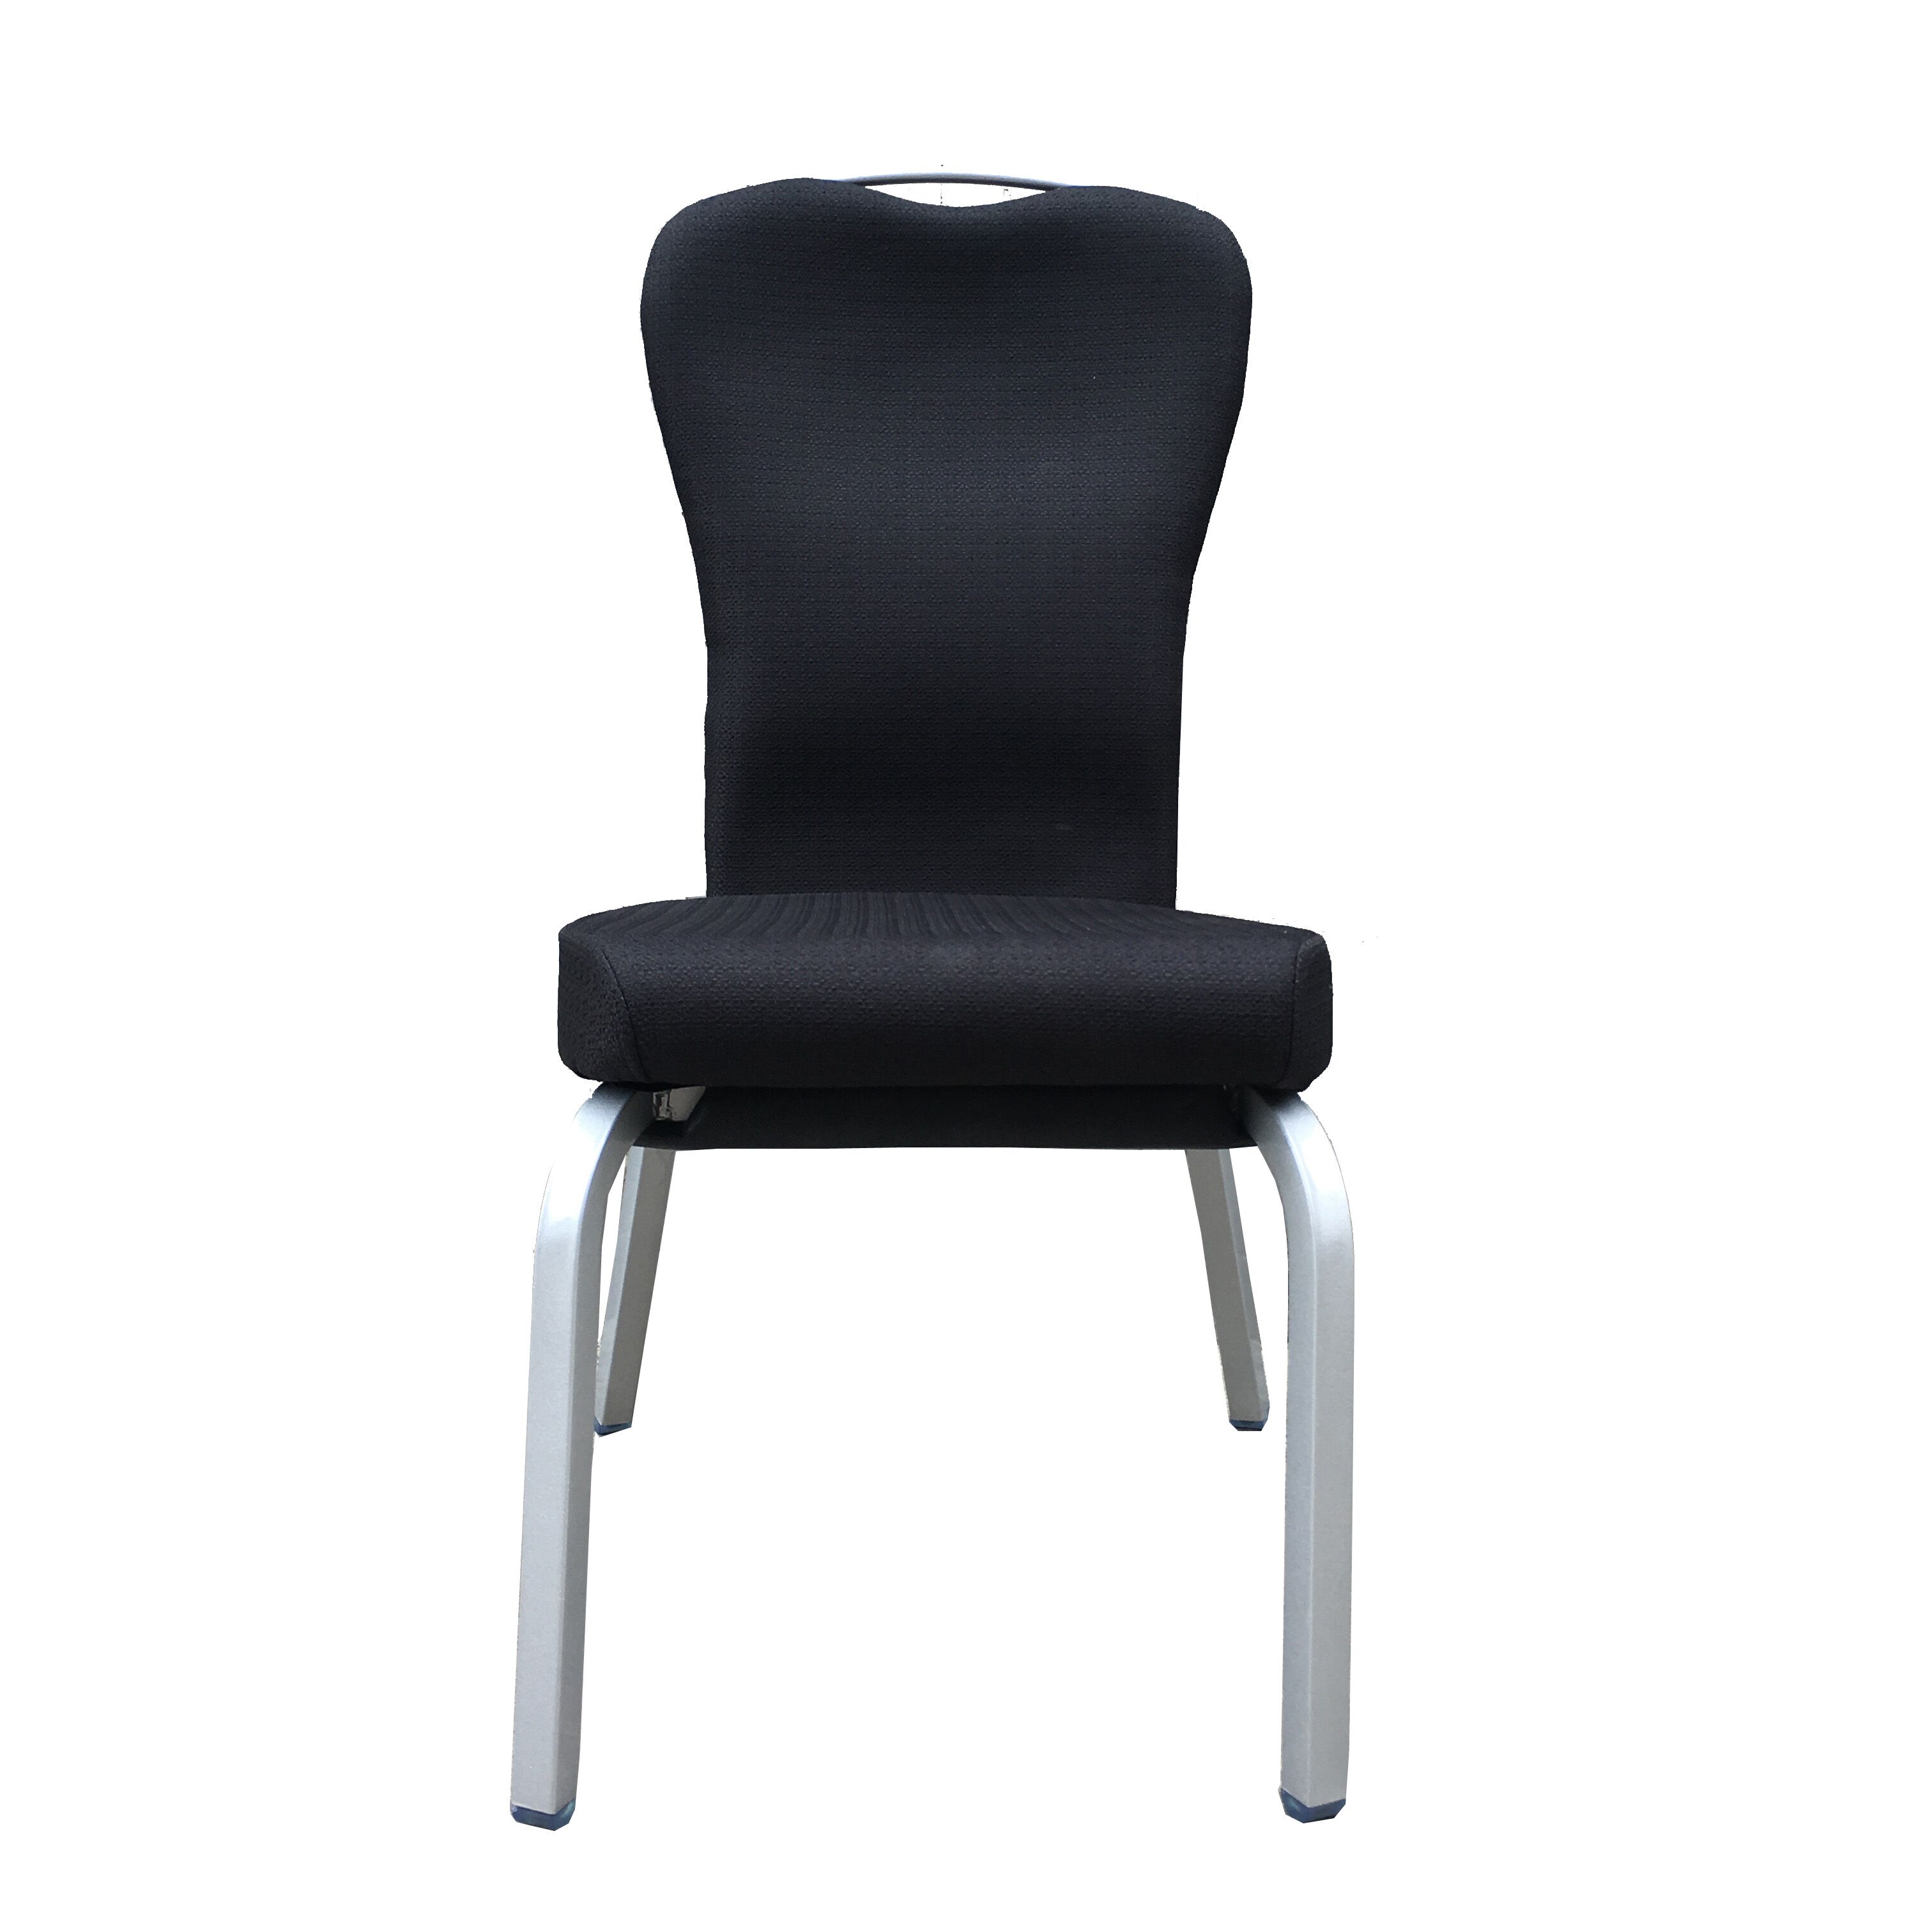 SF-L24 aluminum rock back chair Featured Image